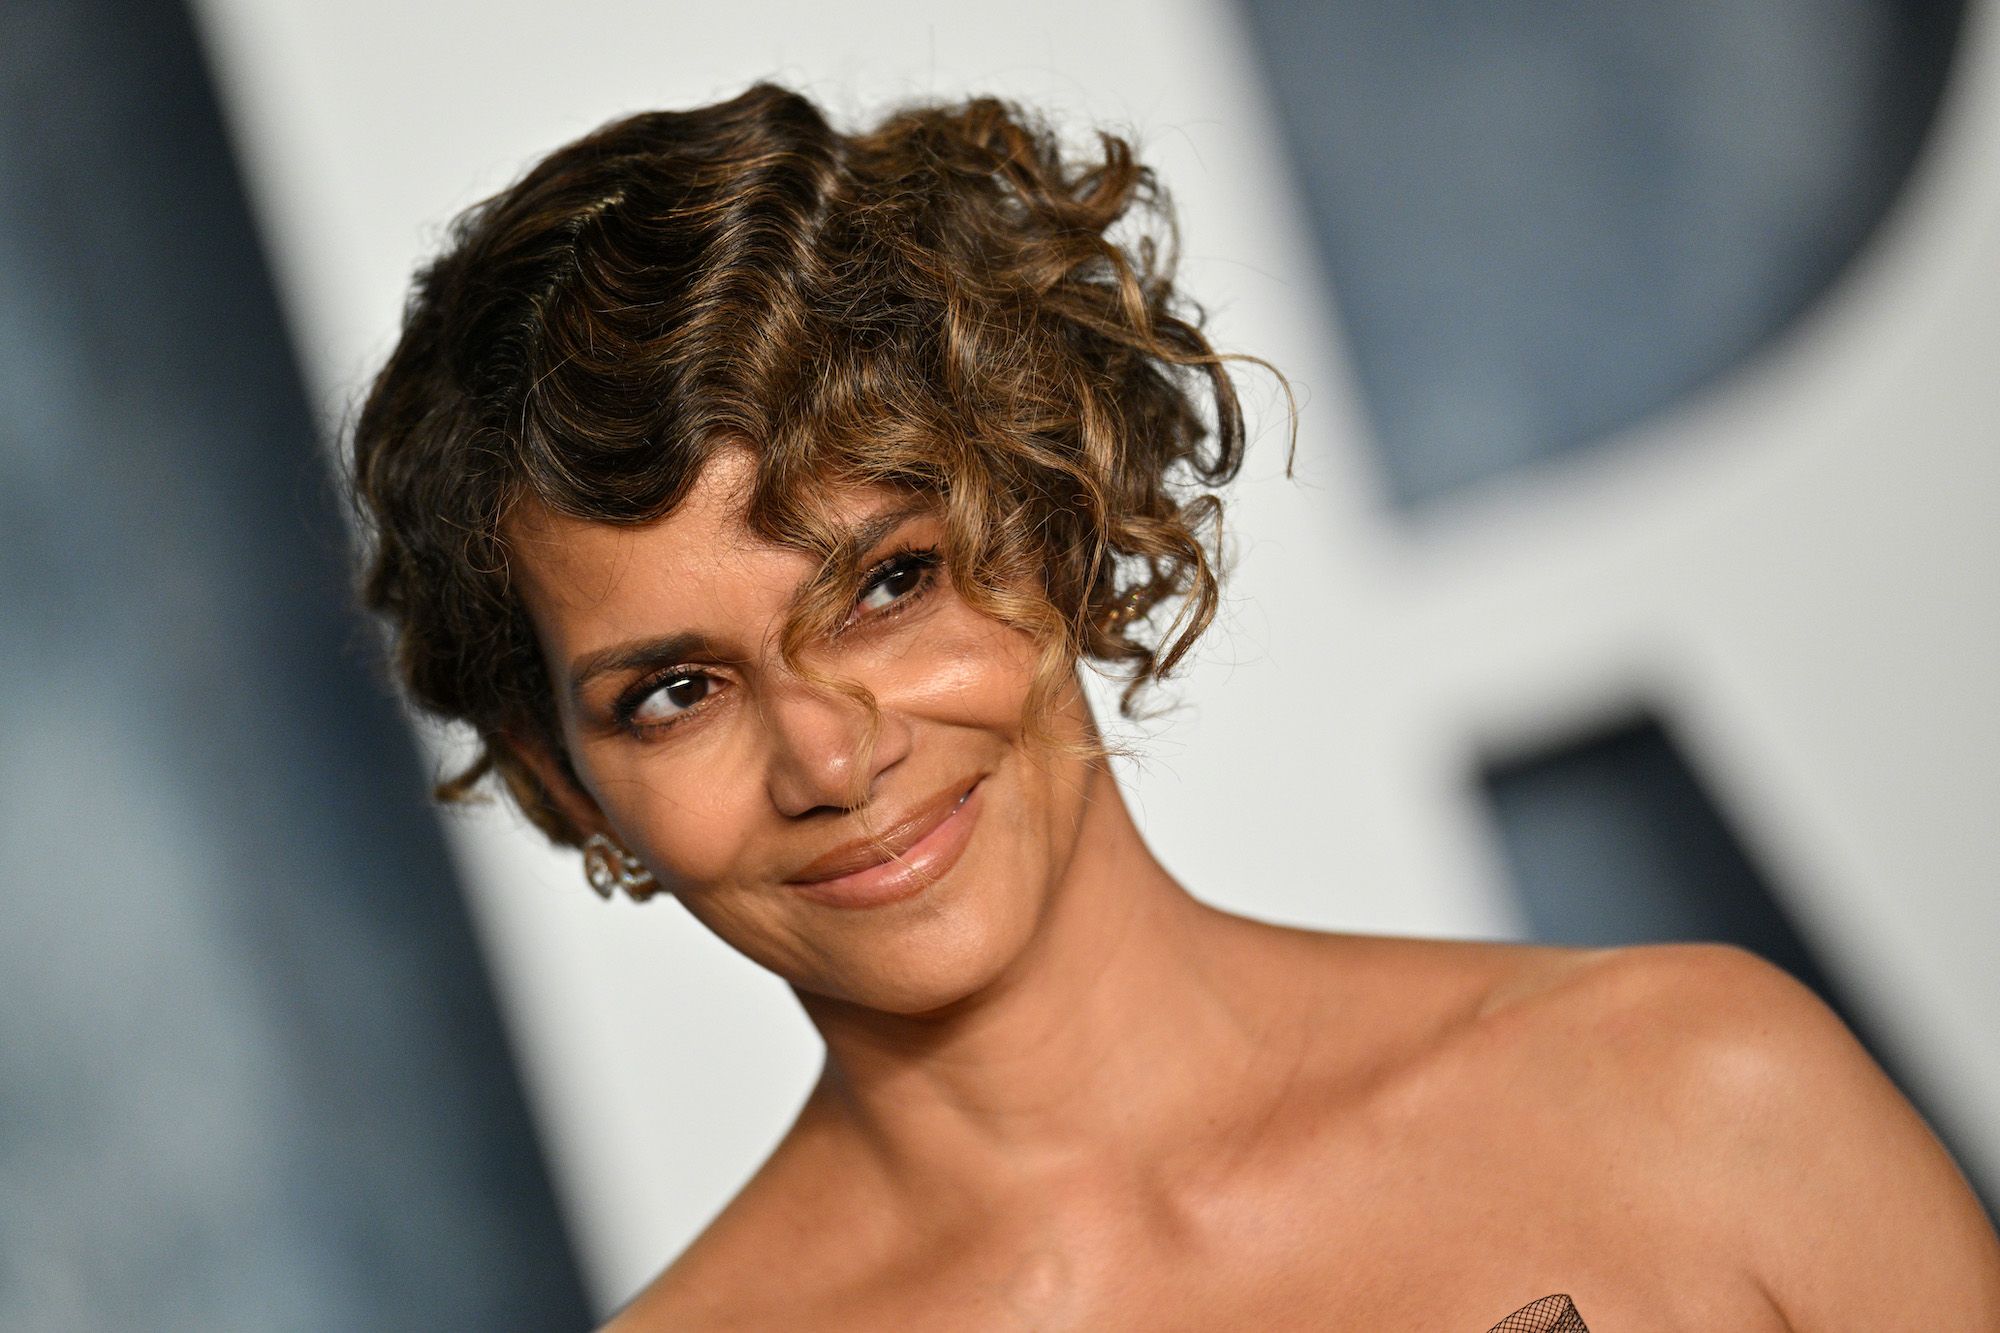 Halle Berry Poses Nude While Drinking Wine on Her Balcony In New picture